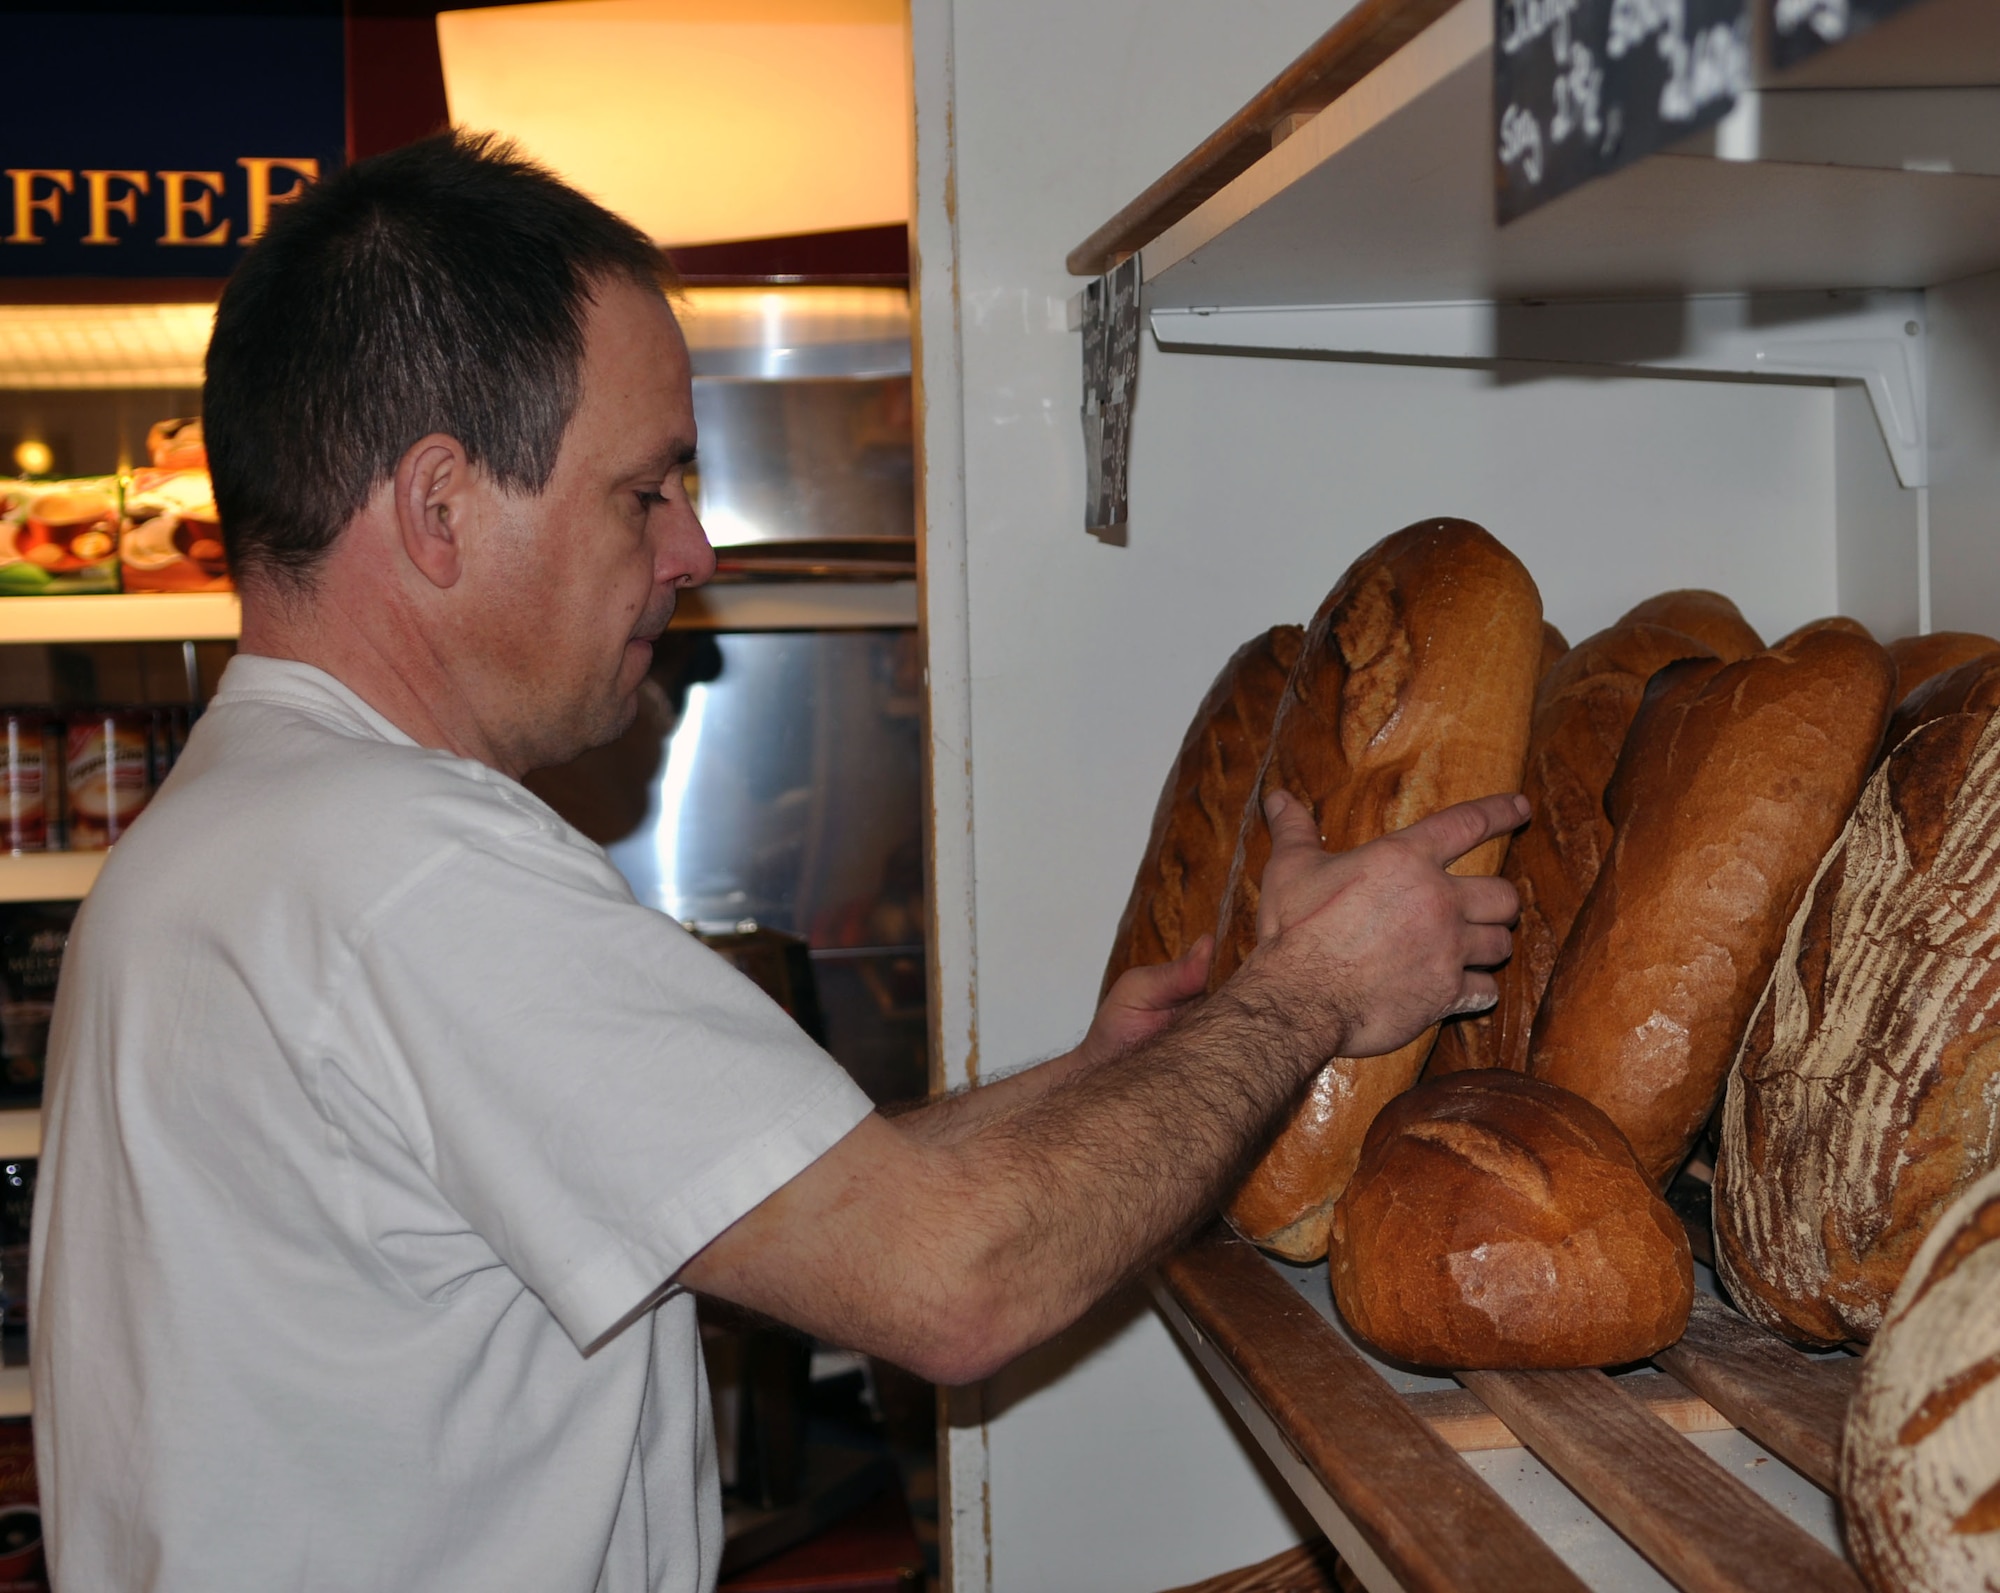 A local baker „Meister“ fills up a shelf with fresh bread from the morning baking. There are about 300 different types of bread produced in Germany. The most common and less expensive bread is known as Roggenmischbrot. It is rye mixed bread with wheat or other flour. Bauernbrot is similar to Roggenmischbrot but a bit tastier. It is usually round. Weizenmischbrot is also similar to Roggenmischbrot, it is also light in color, but is made with different proportions of wheat and rye. The shapes of breads are only limited by the bakers’ imagination. Bread rolls are very popular in Germany. (U.S. Air Force photo by Iris Reiff/Released)
